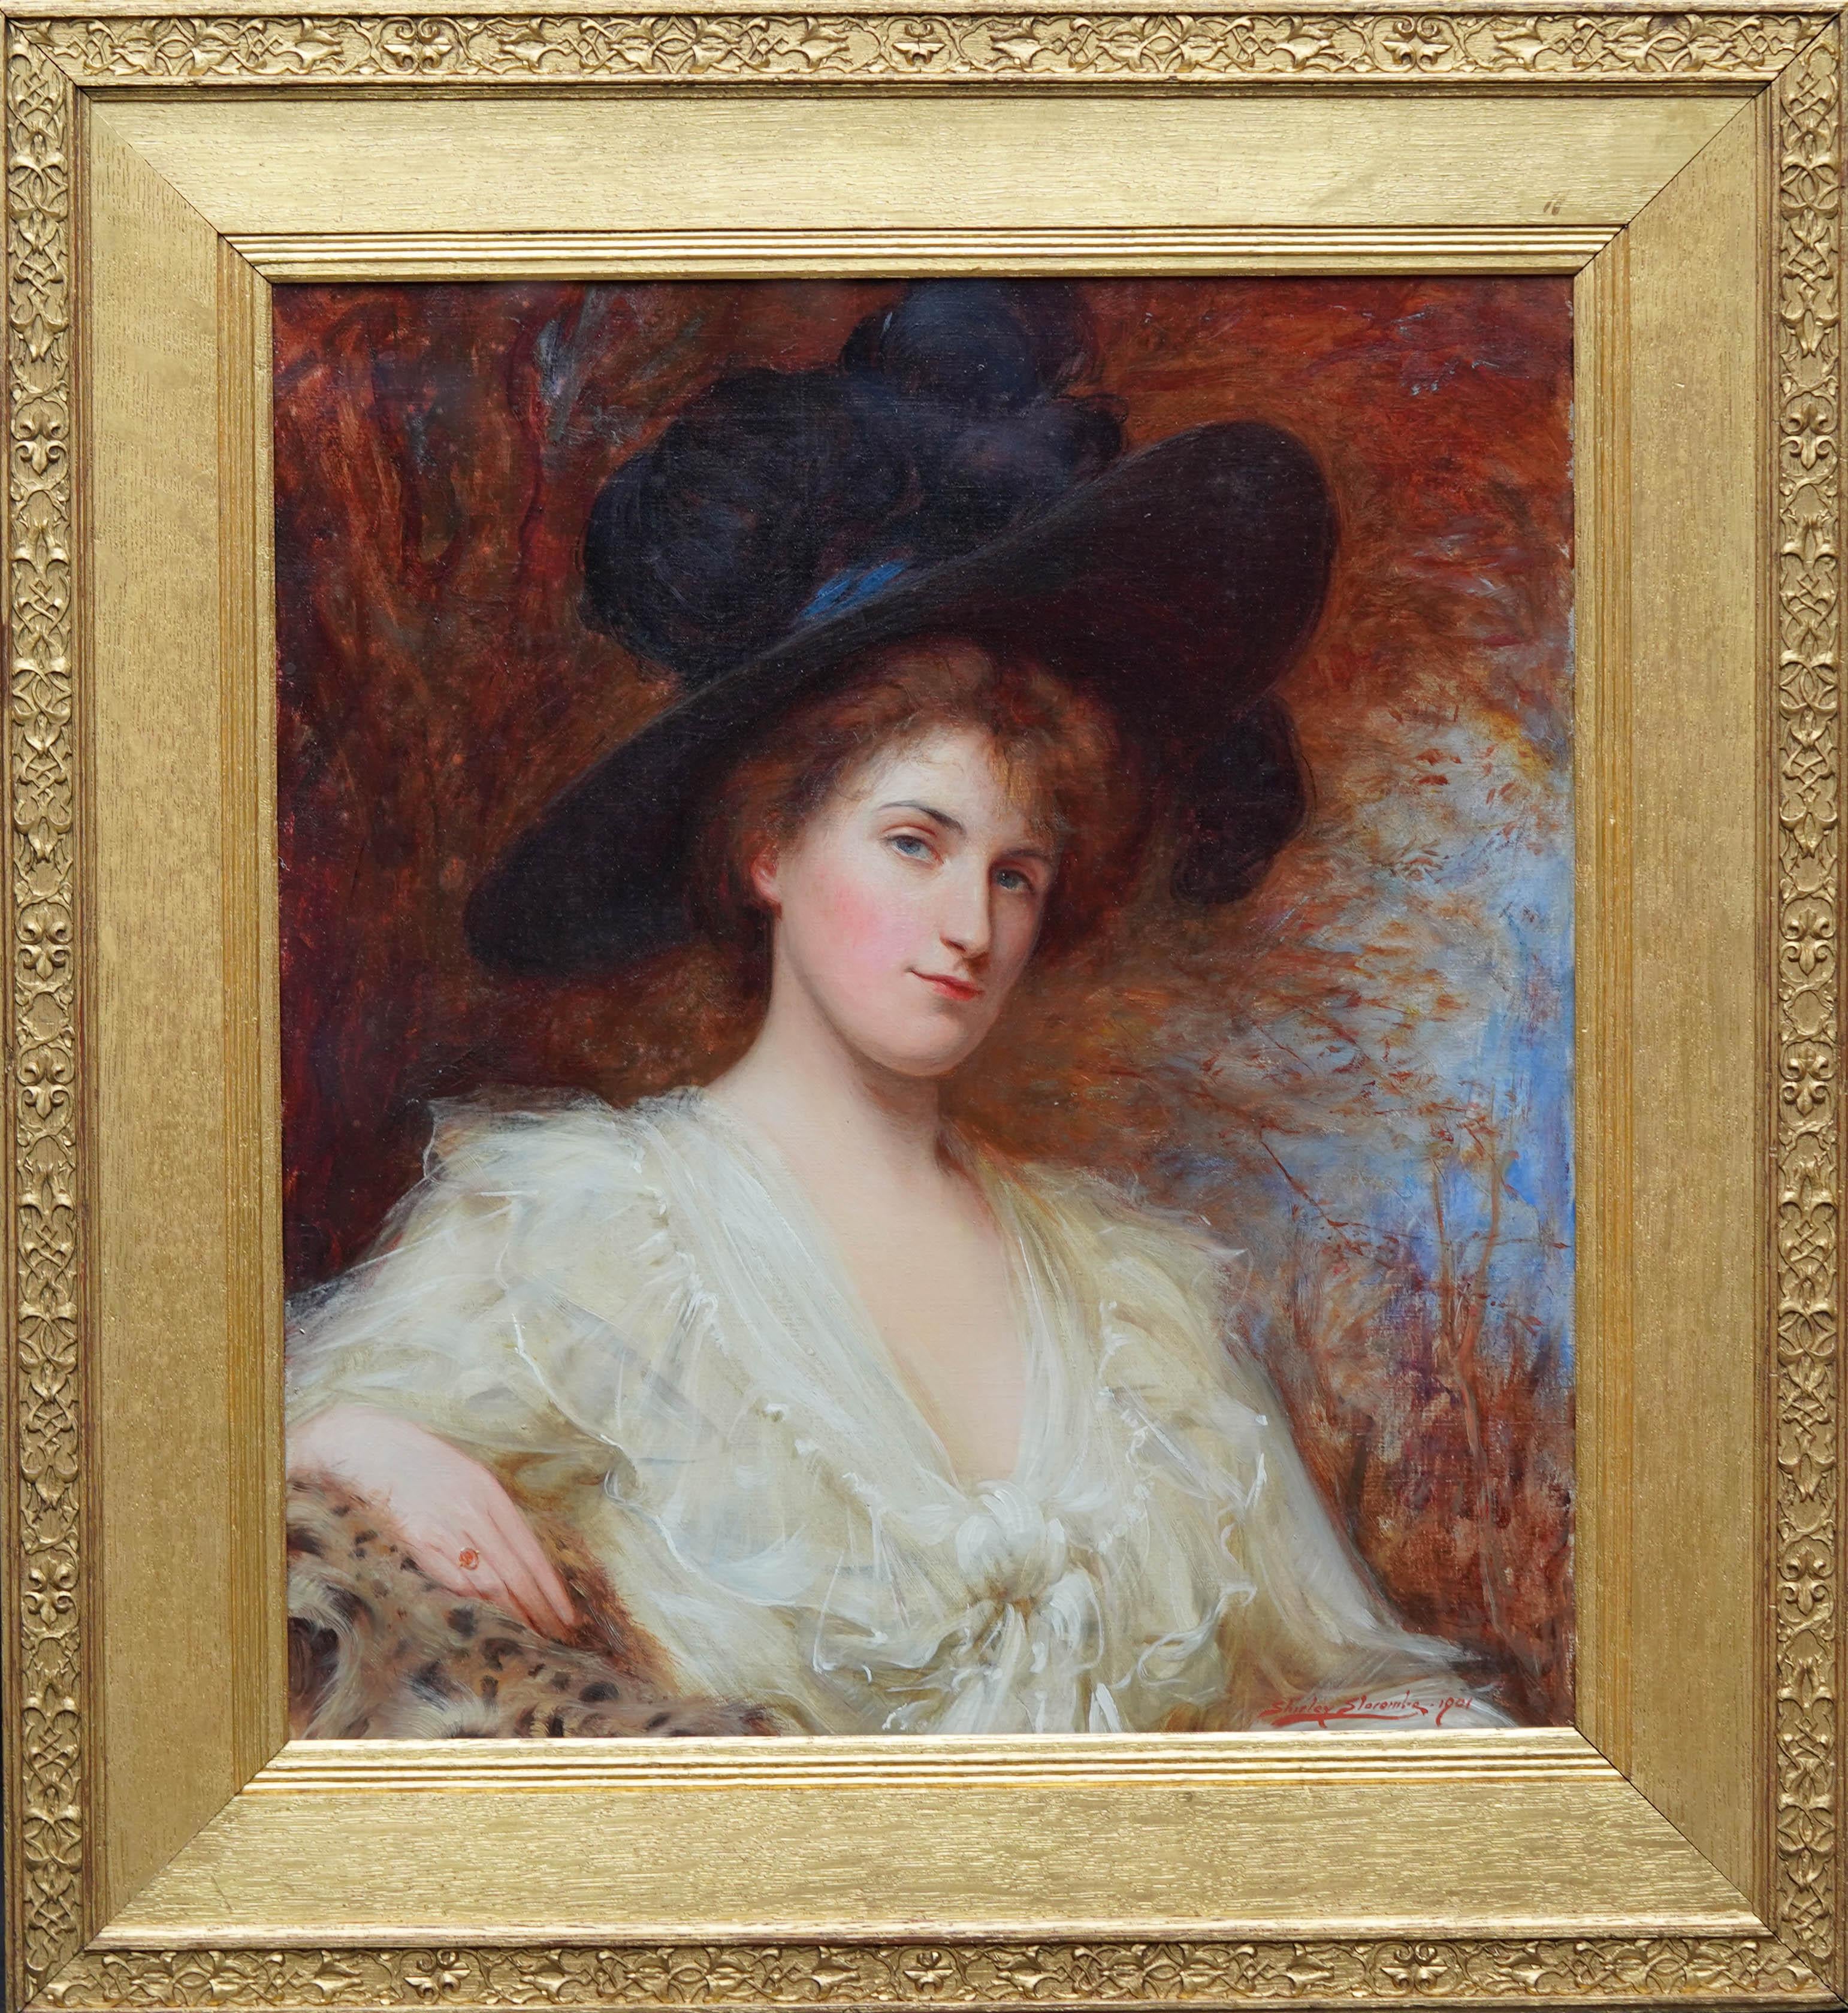 Shirley Charles Slocombe Portrait Painting - Portrait of a Lady in Black Hat - British Edwardian art oil painting